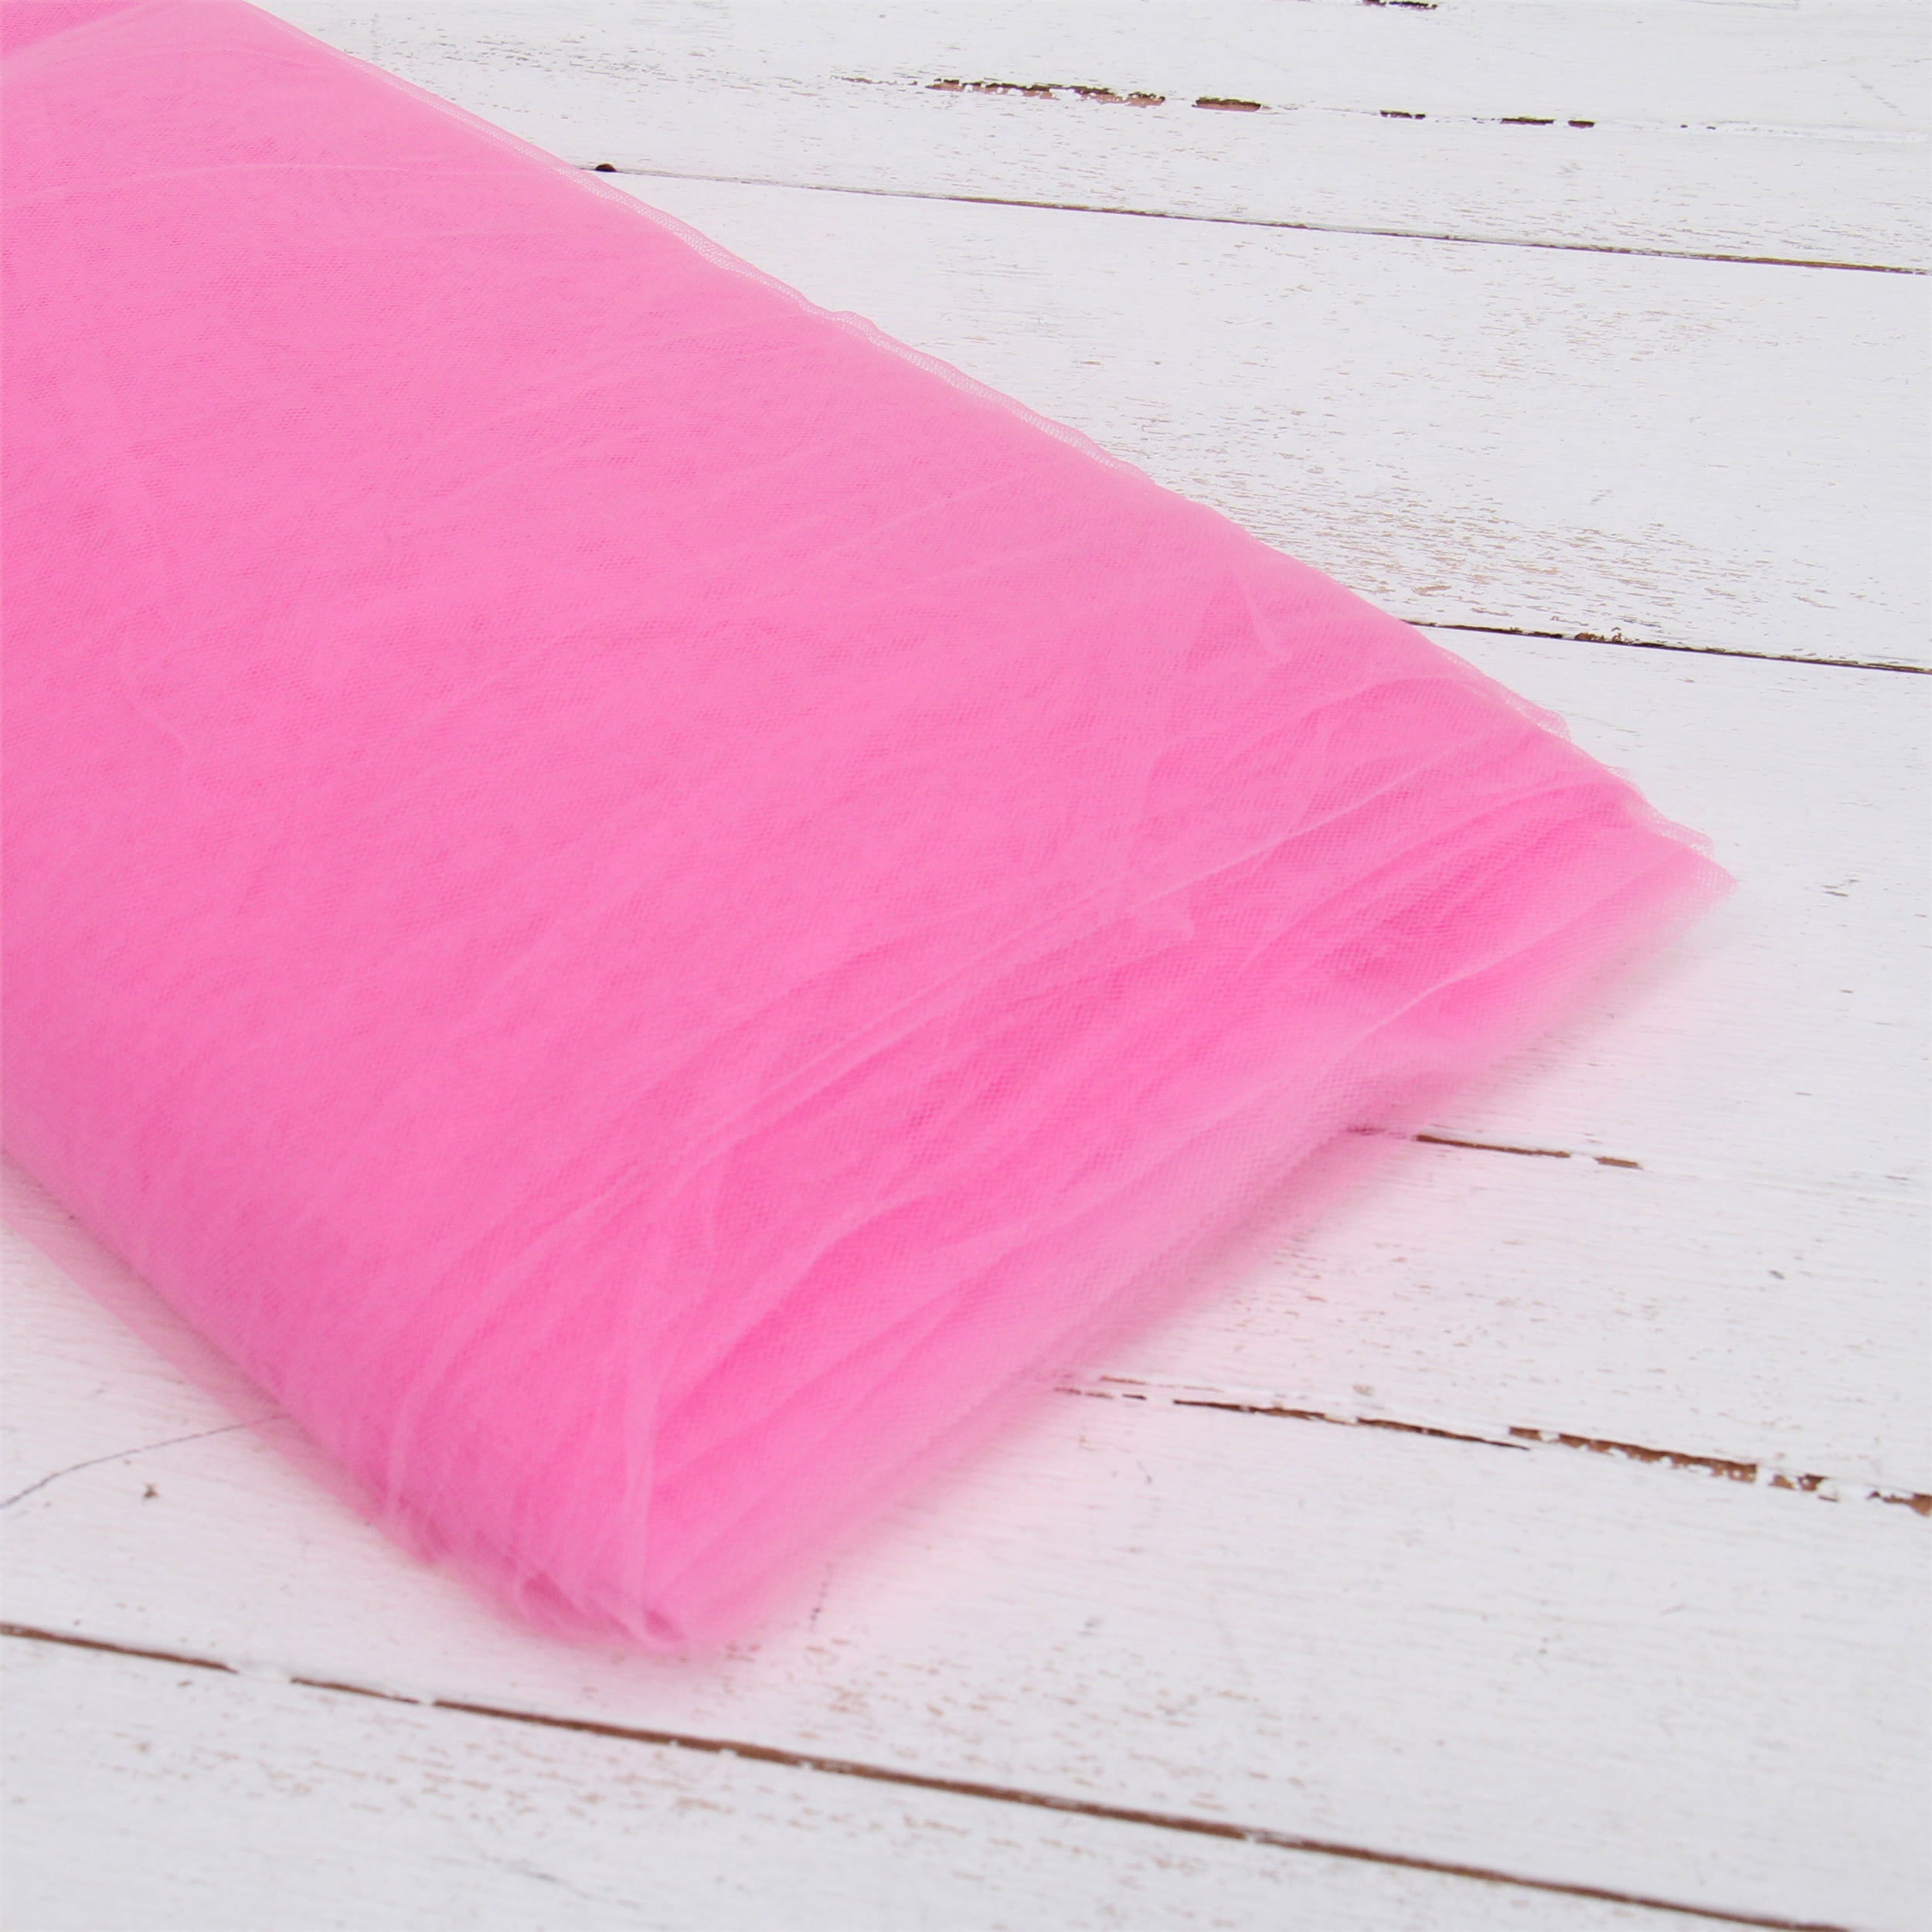 Nylon Tulle Sheer Fabric Pink 54 inch wide DD316